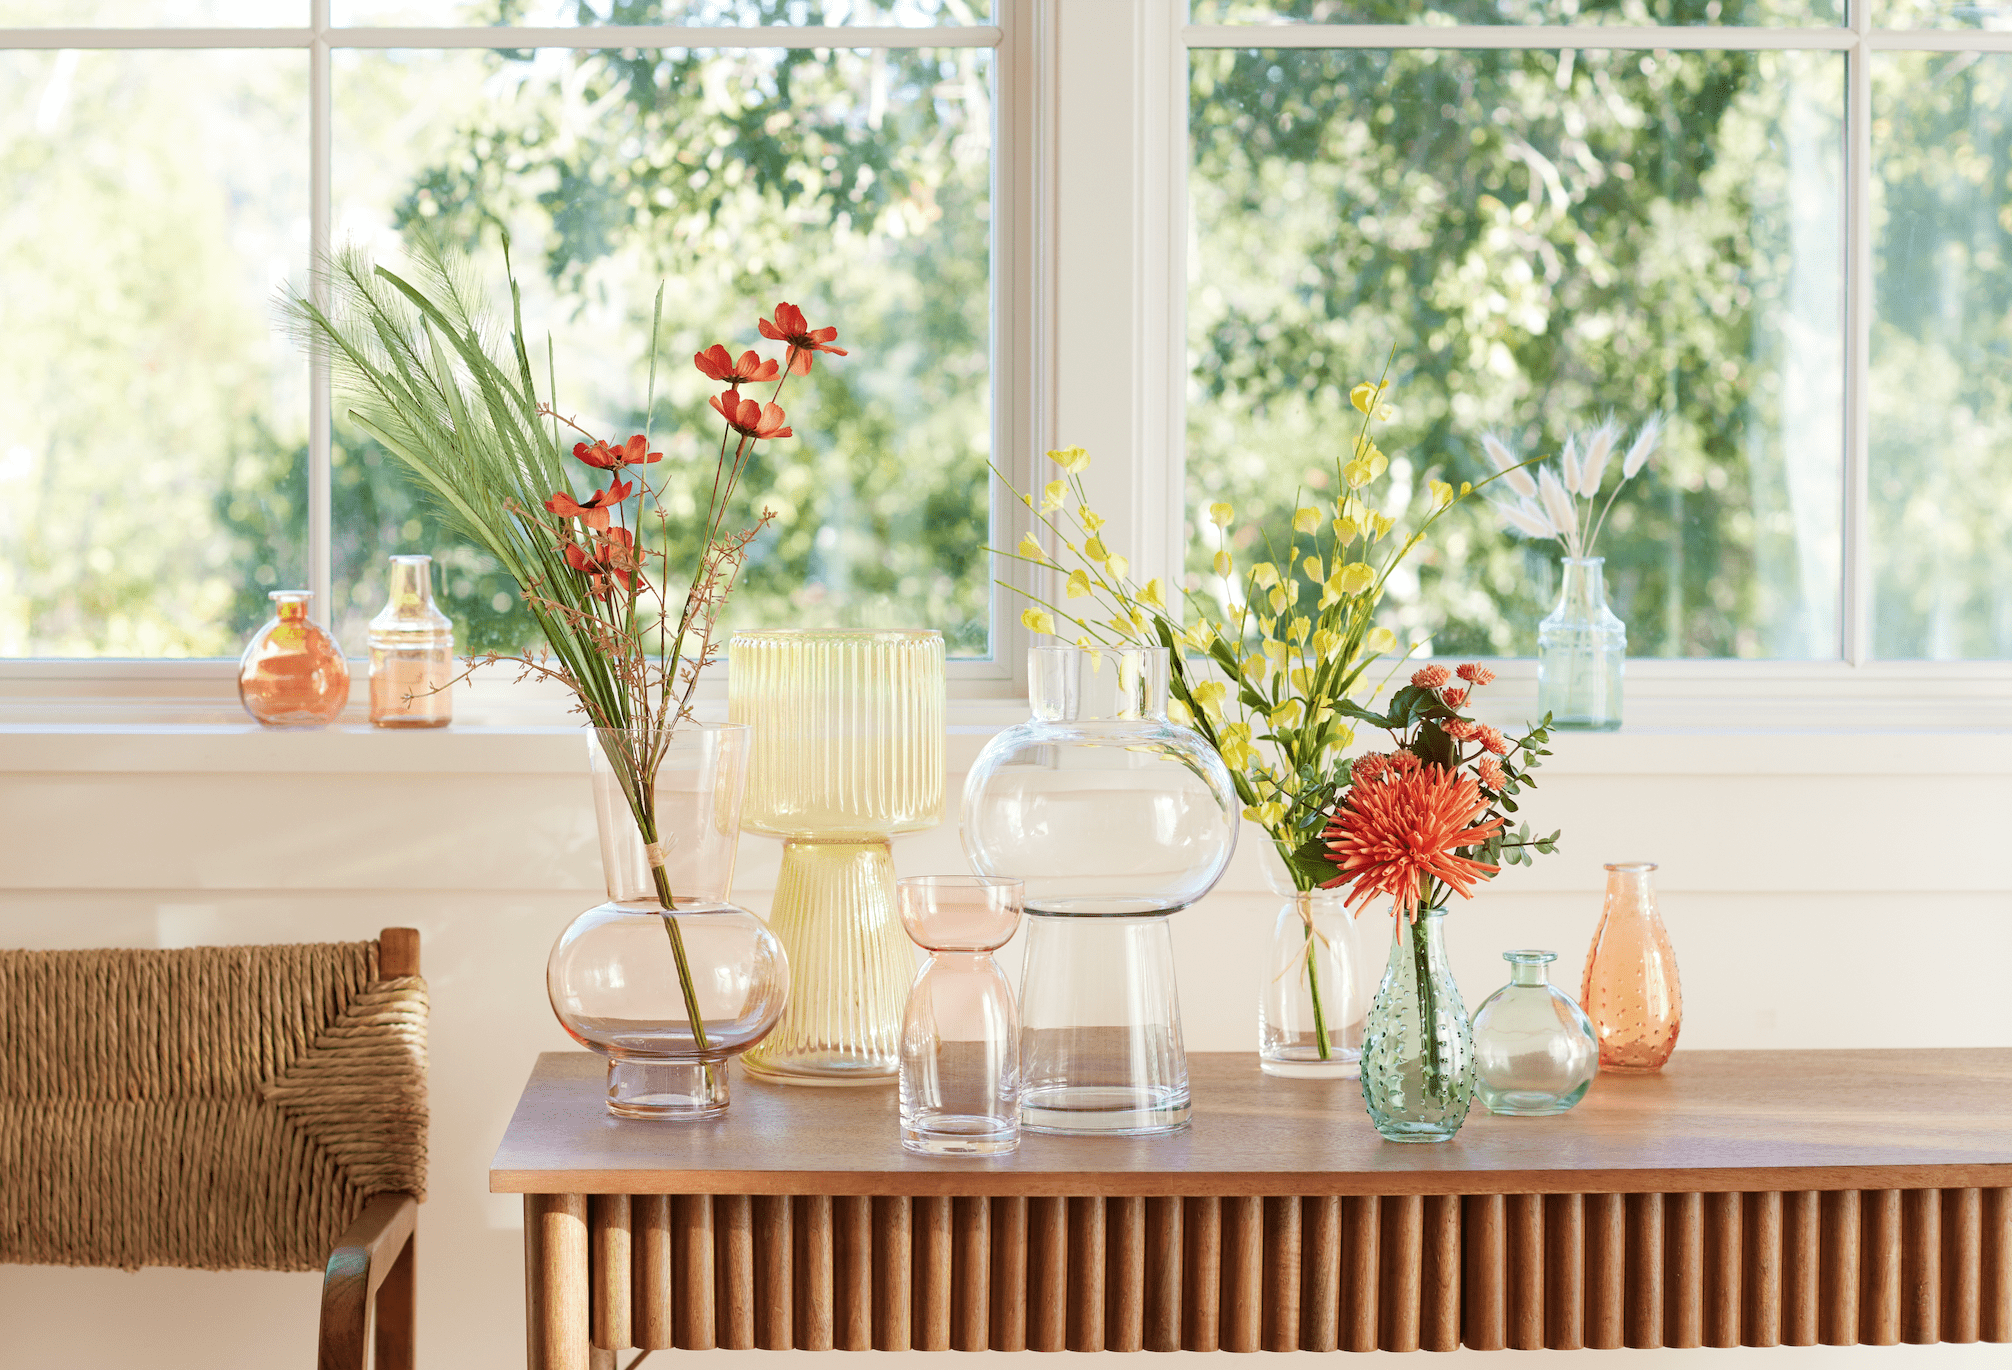 Bloom Shop Has All the Decor You Need for Spring